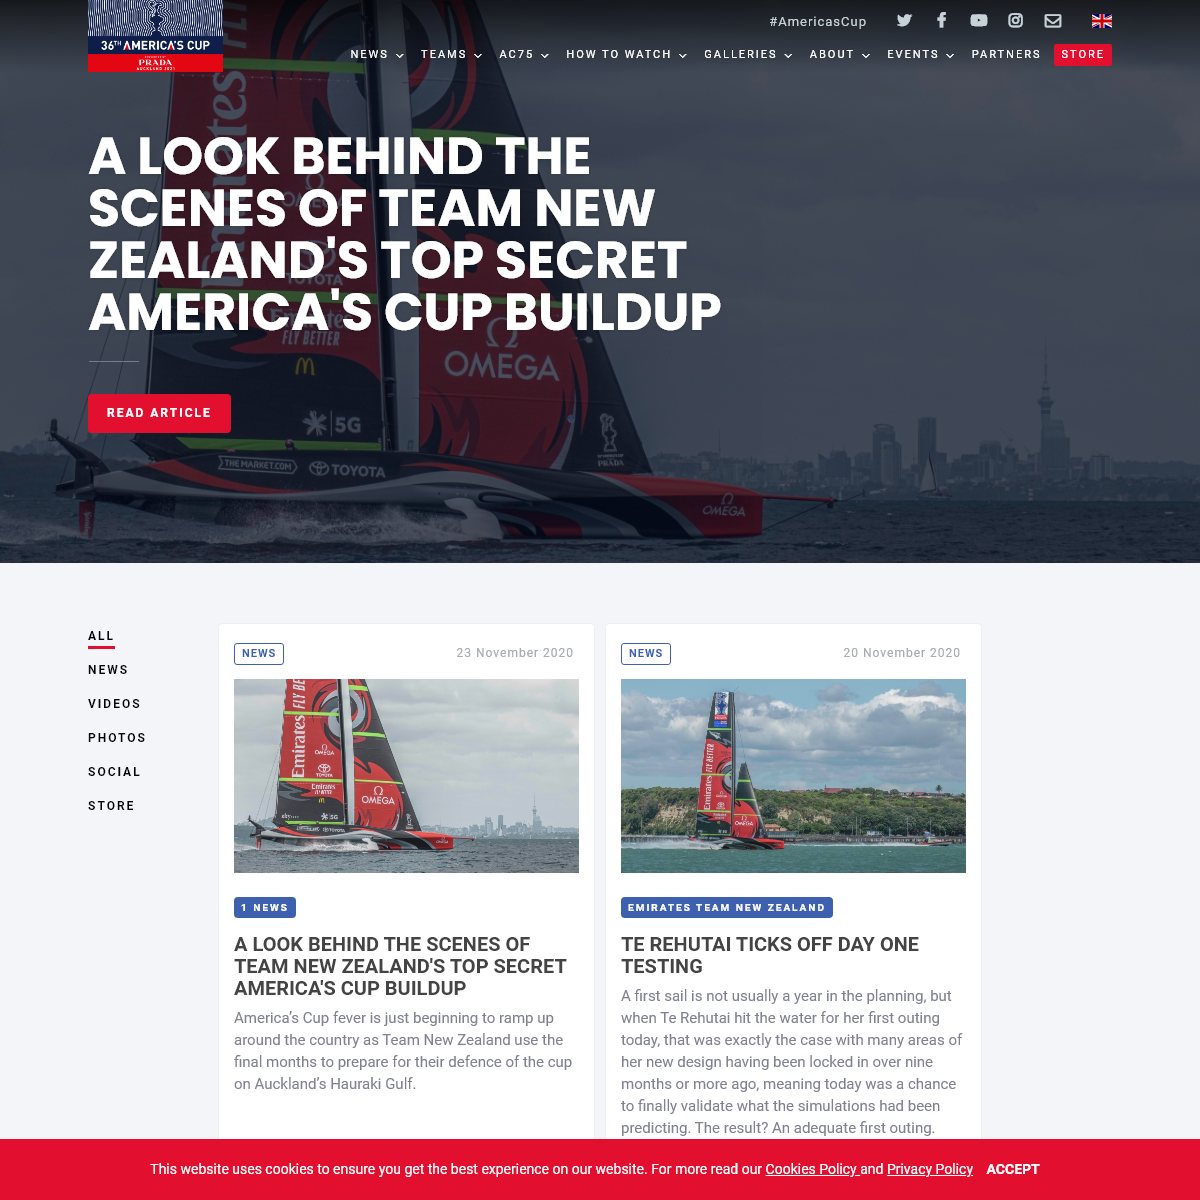 A complete backup of americascup.com